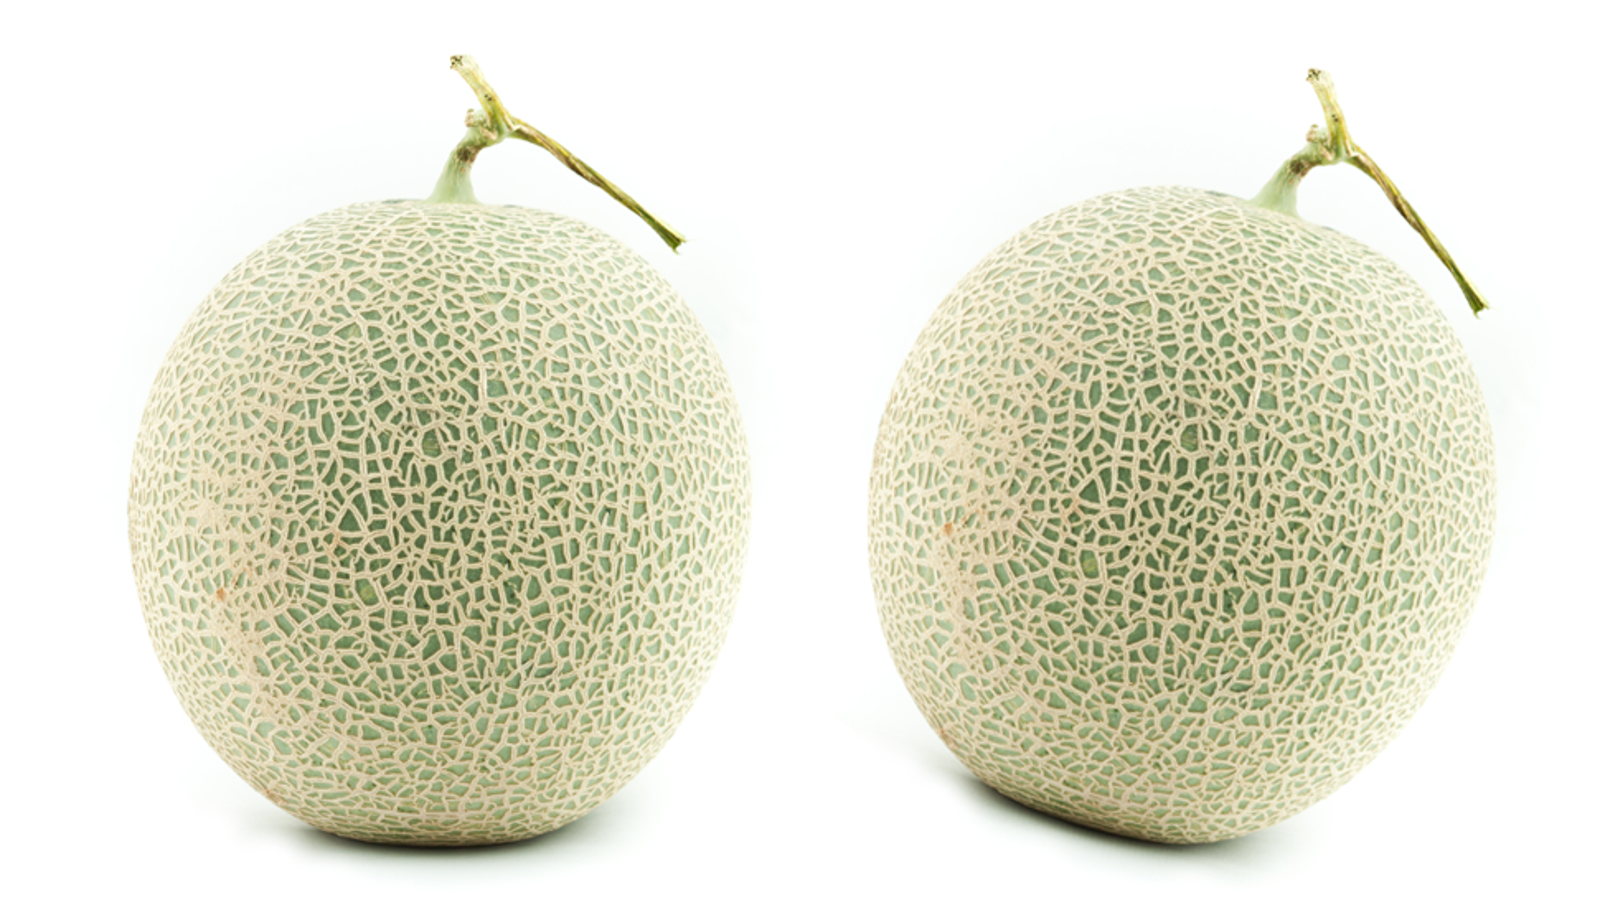 Two Melons  Just Sold for 15 730 in Japan